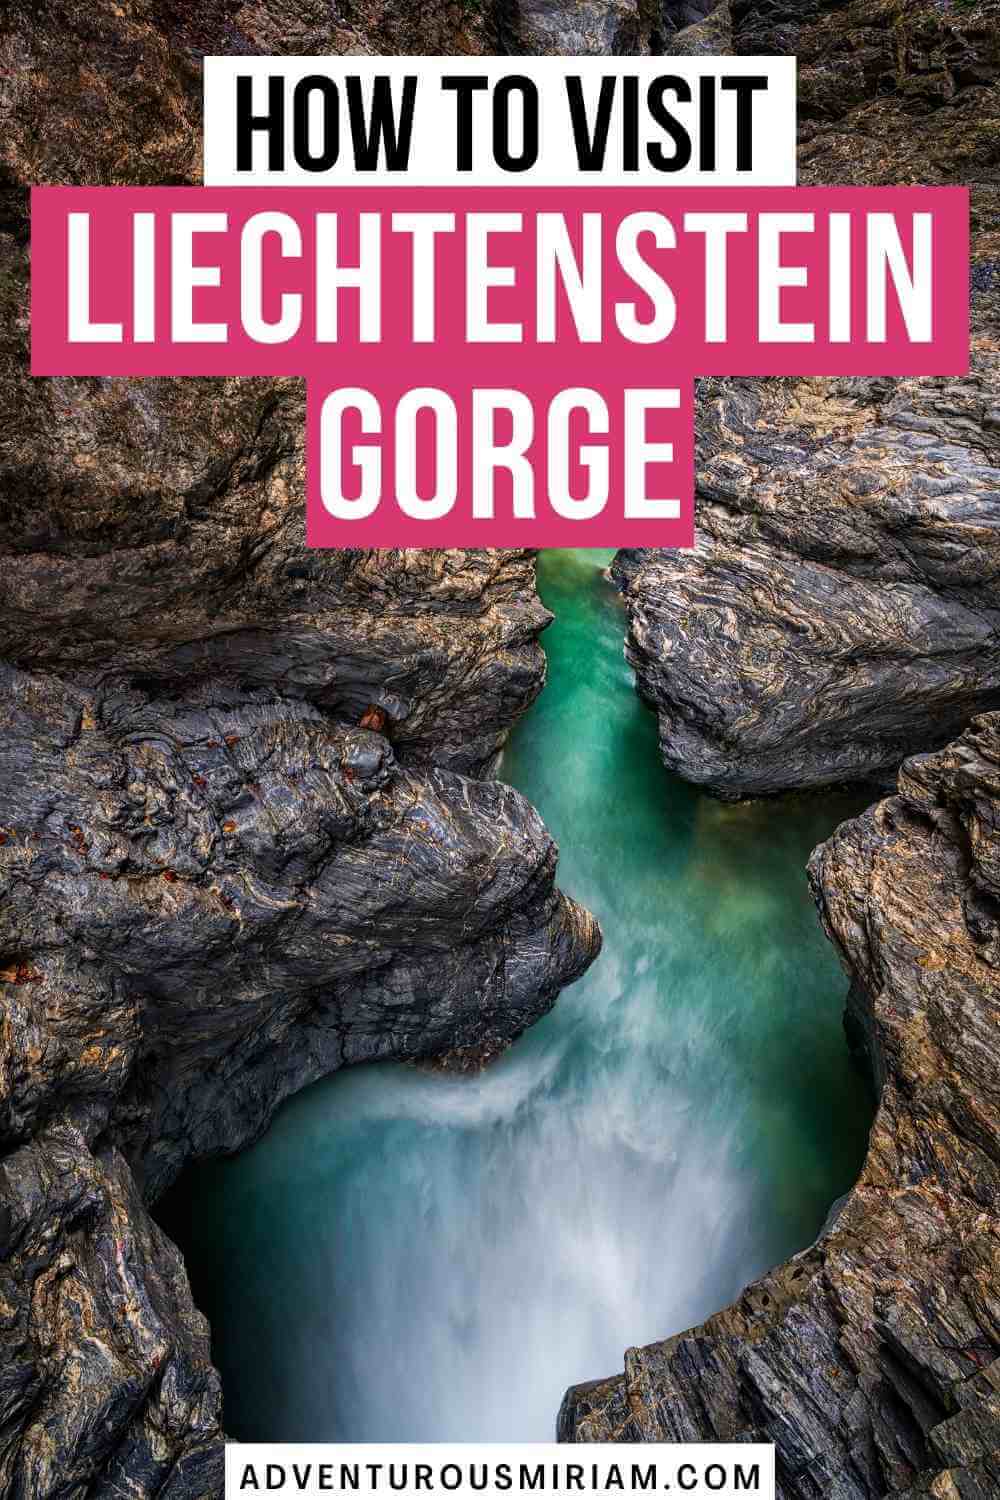 This is Liechtensteinklamm, a spectacular gorge in Austria. Think emerald-green water, mossy stones, vertigo-inducing cliffs, misty waterfalls and ancient legends. It's only 50km south of Salzburg and one of the deepest and longest gorges in the Alps. Get your travel guide to Liechtensteinklamm here. Europe travel. Liechtensteinklamm gorge. Liechtenstein gorge Austria. St Johann Im Pongau. Salzburgerland. 